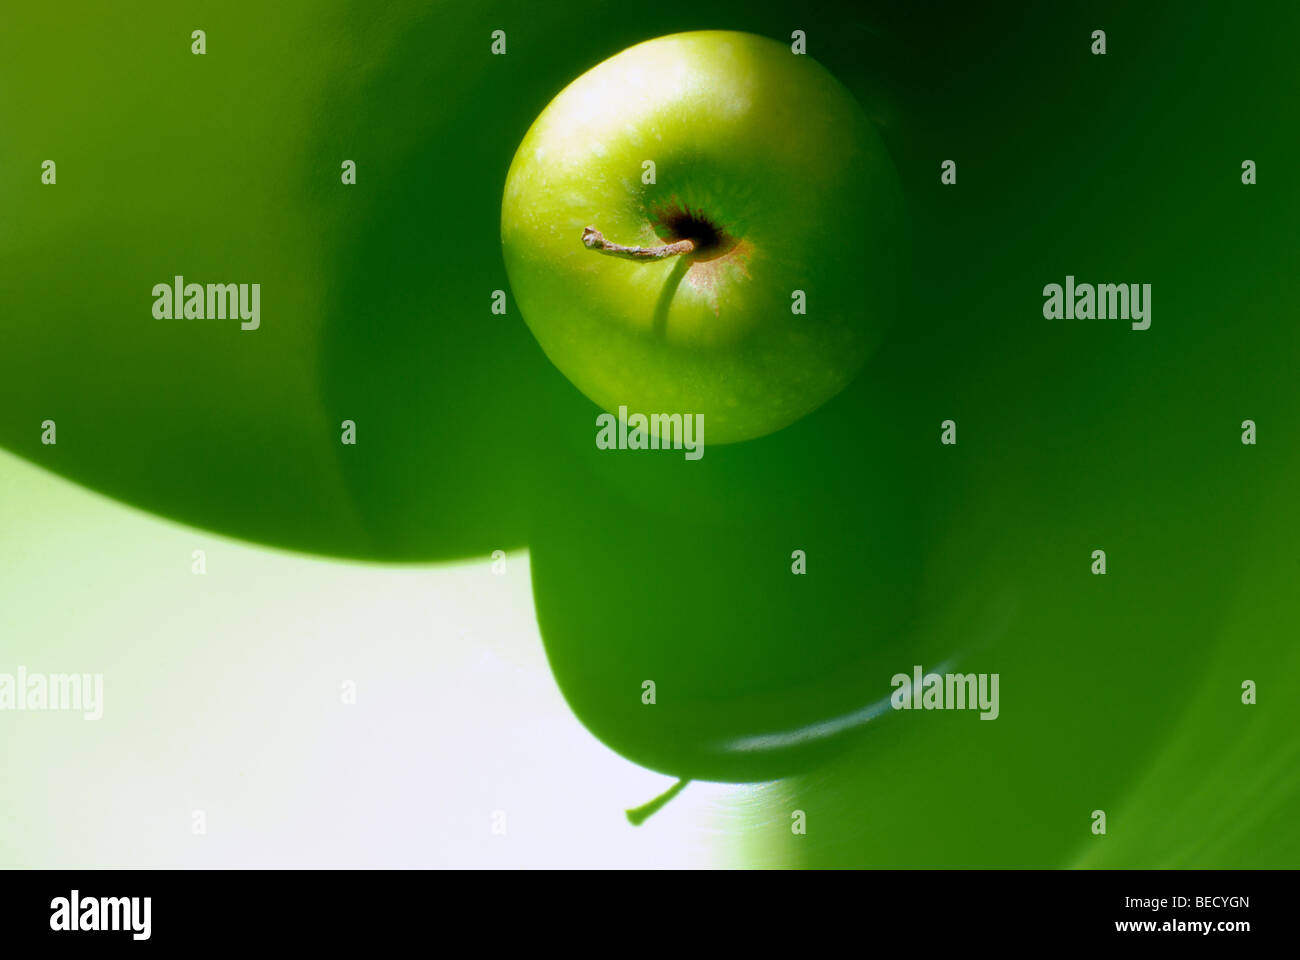 GREEN APPLE IN A GREEN PLASTIC BOWL BACK LIT WITH SHARP GREEN SHADOW STILL LIFE COLOR NOBODY Stock Photo